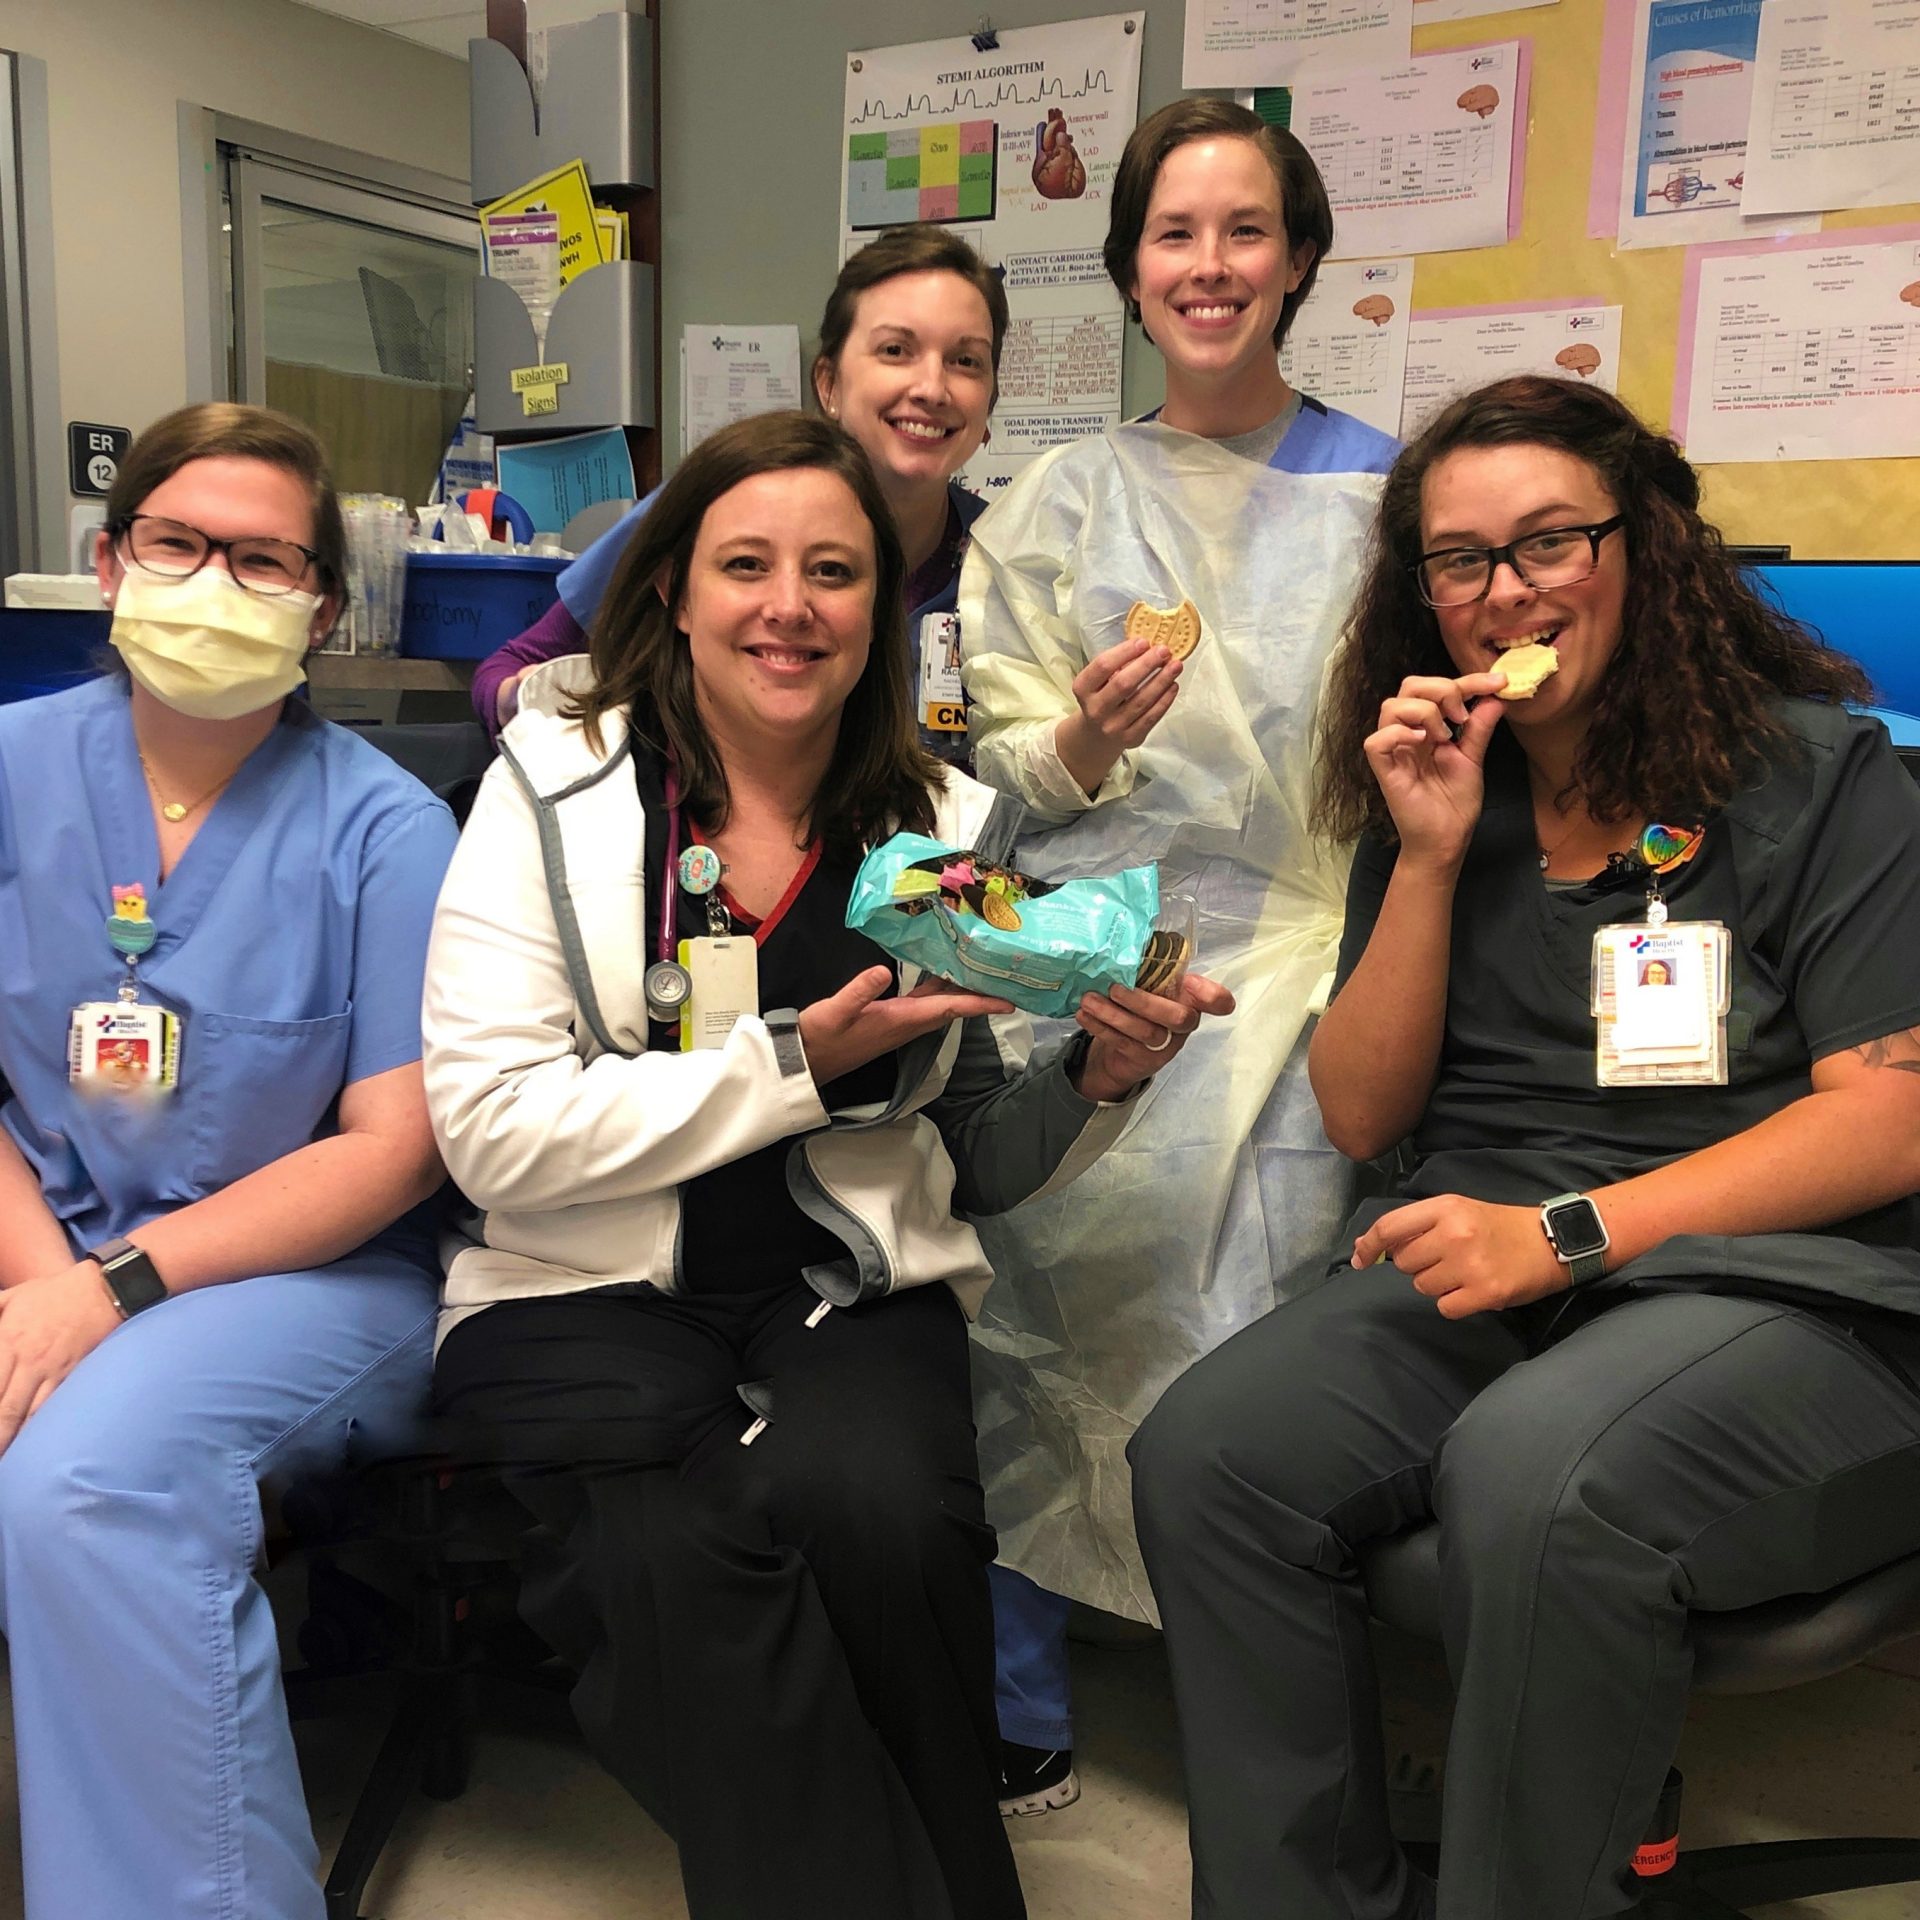 Group of hospital staff with girl scout cookies